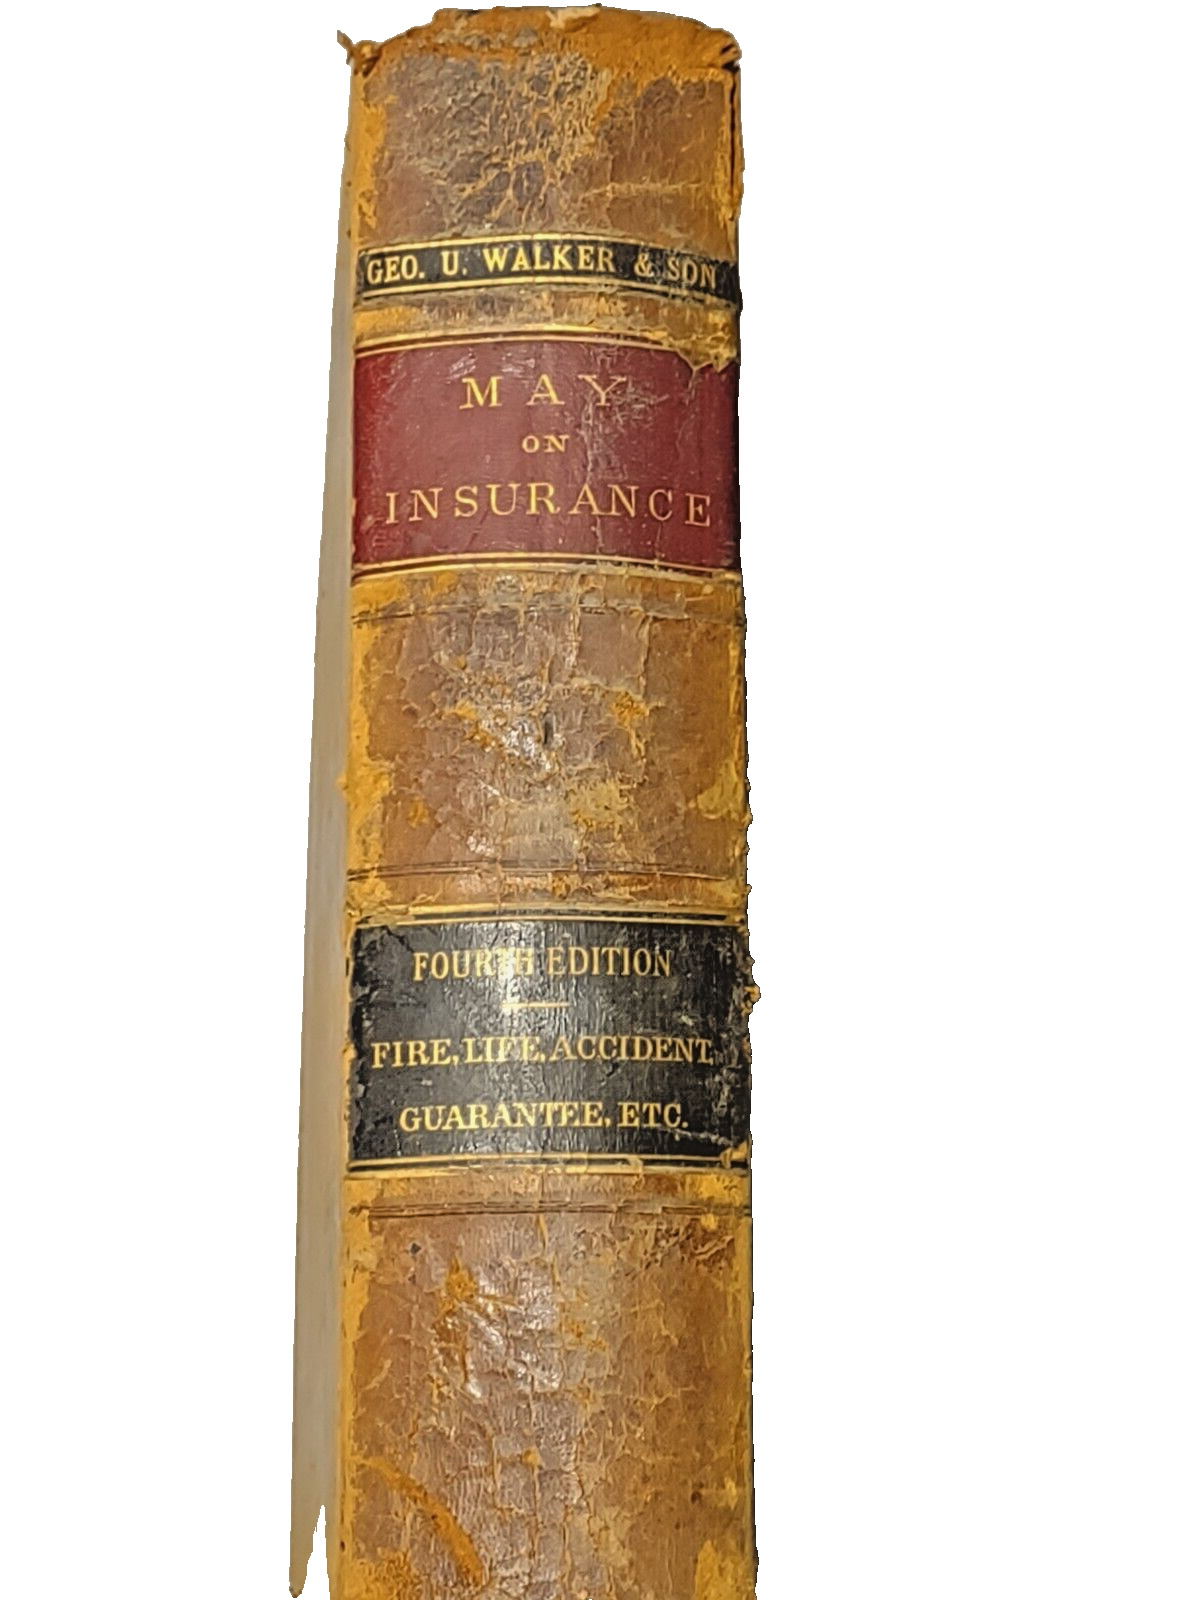 ANTIQUE LAW BOOK THE LAW OF INSURANCE  1900- VOL I 4TH ED BY JOHN W MAY 33024